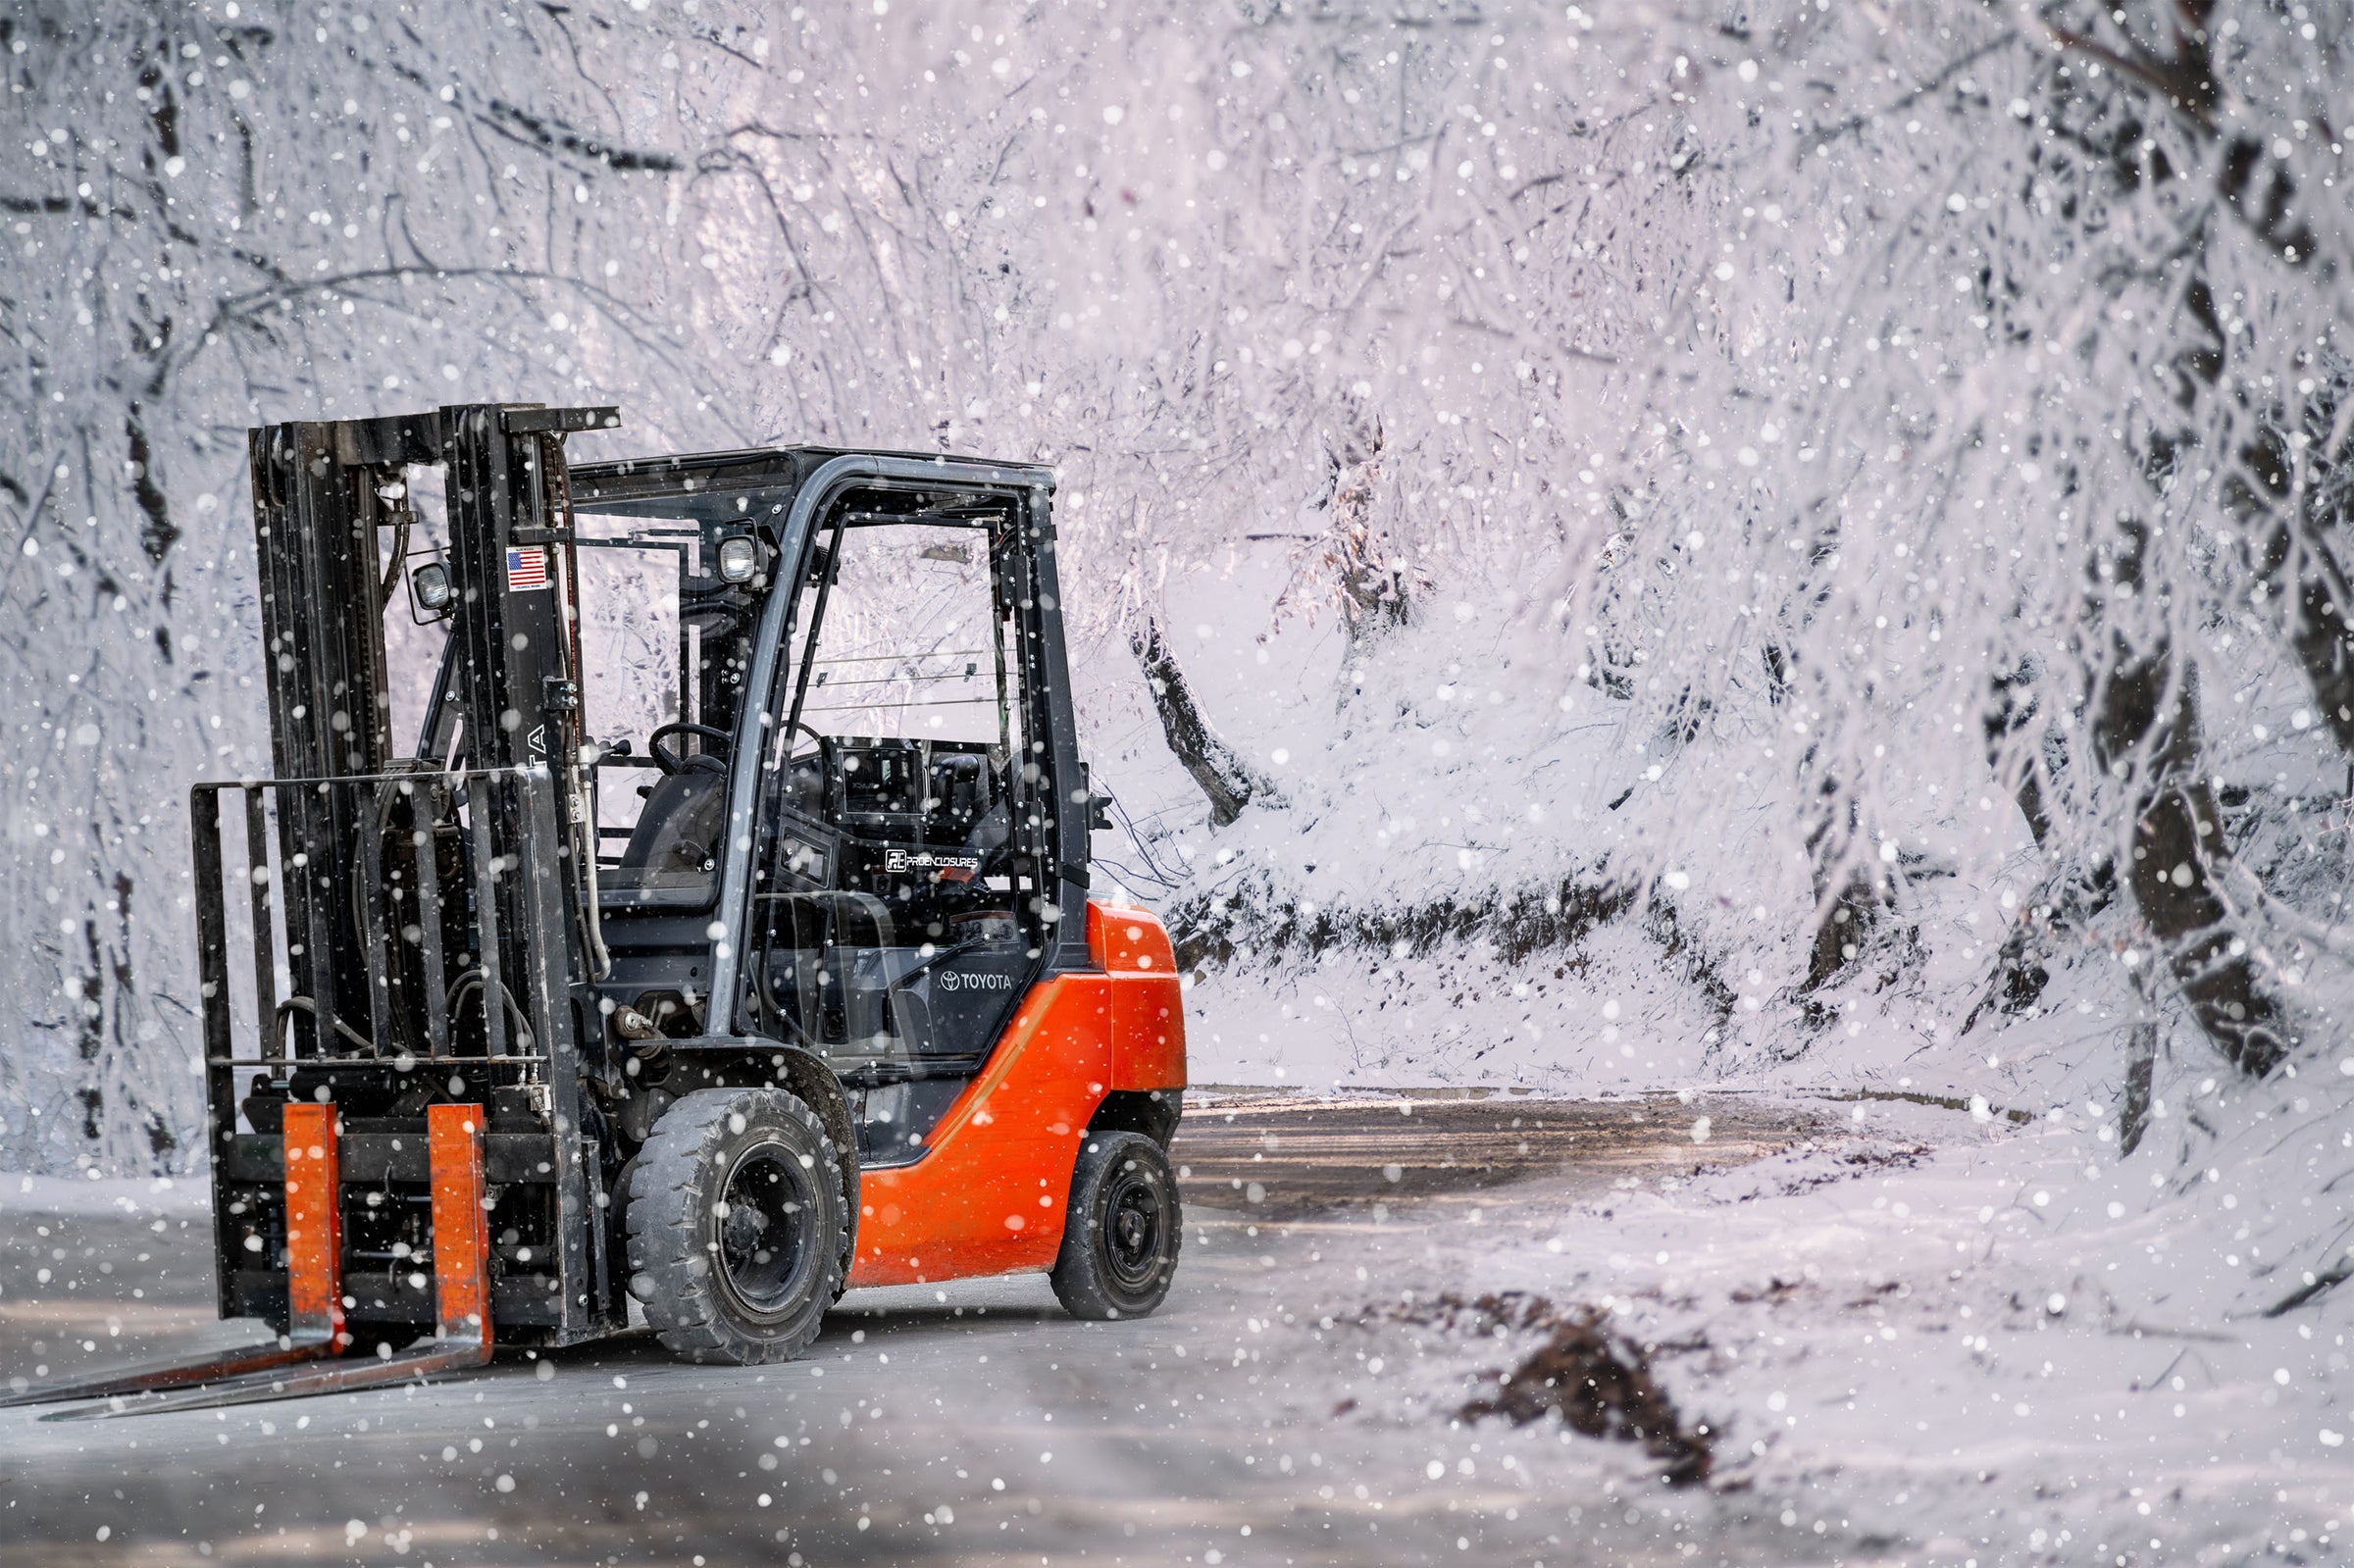 Forklift with a cab enclosure in the snow